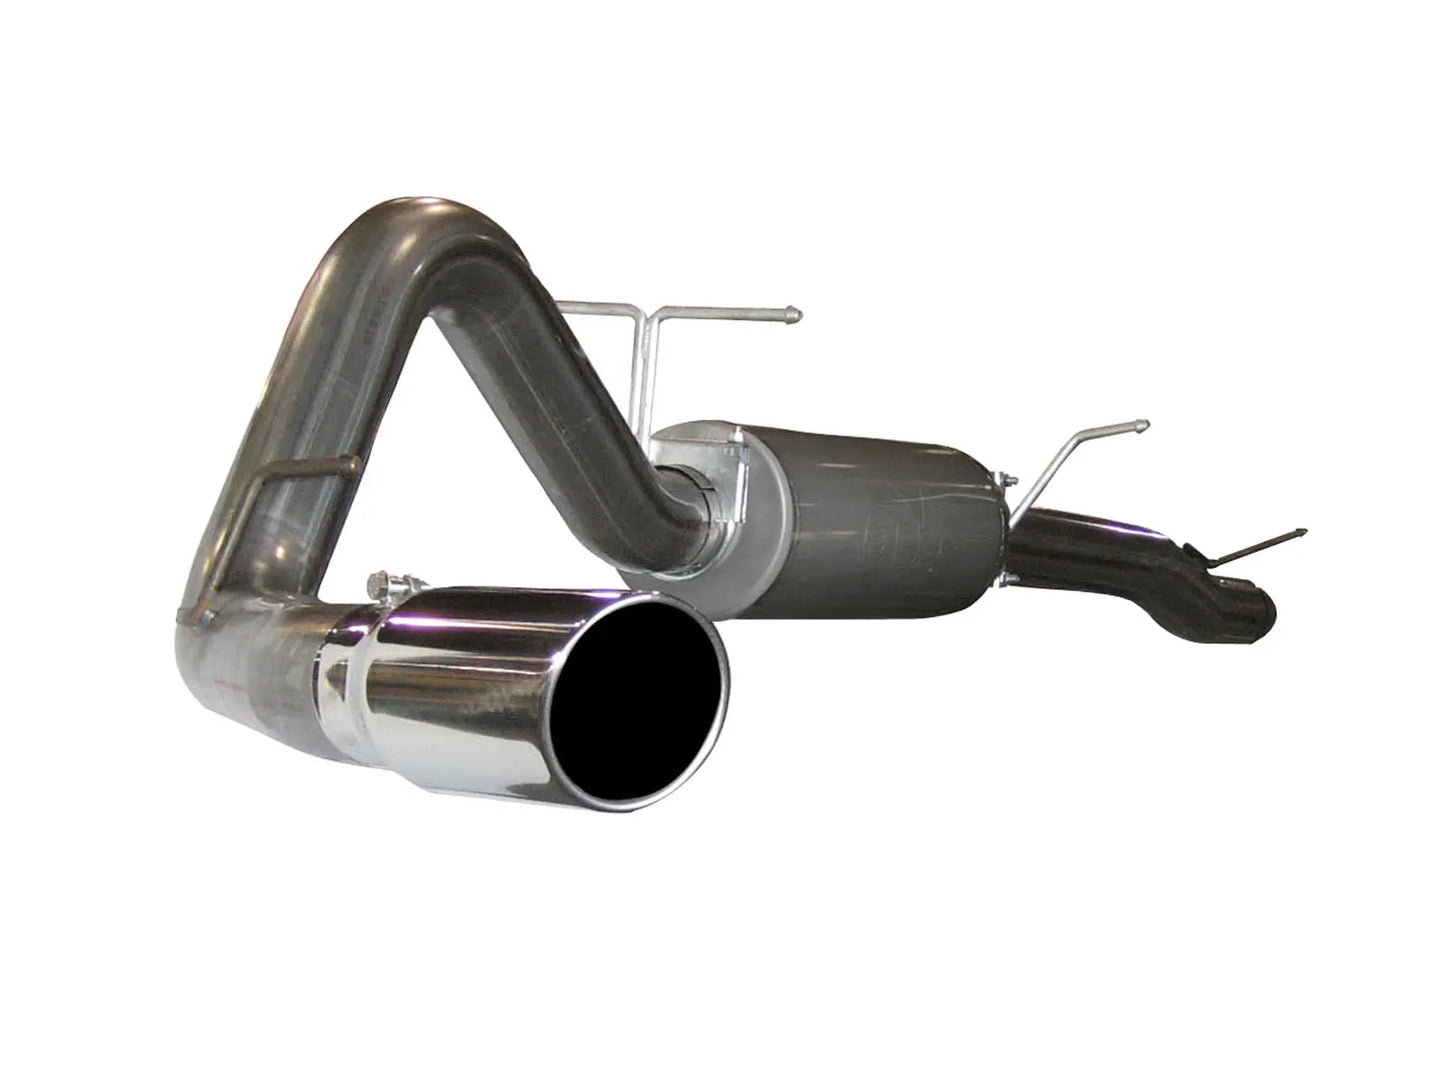 aFe Large Bore-HD Cat-Back Exhaust System for 2003-2007 Ford Trucks (49-43003)